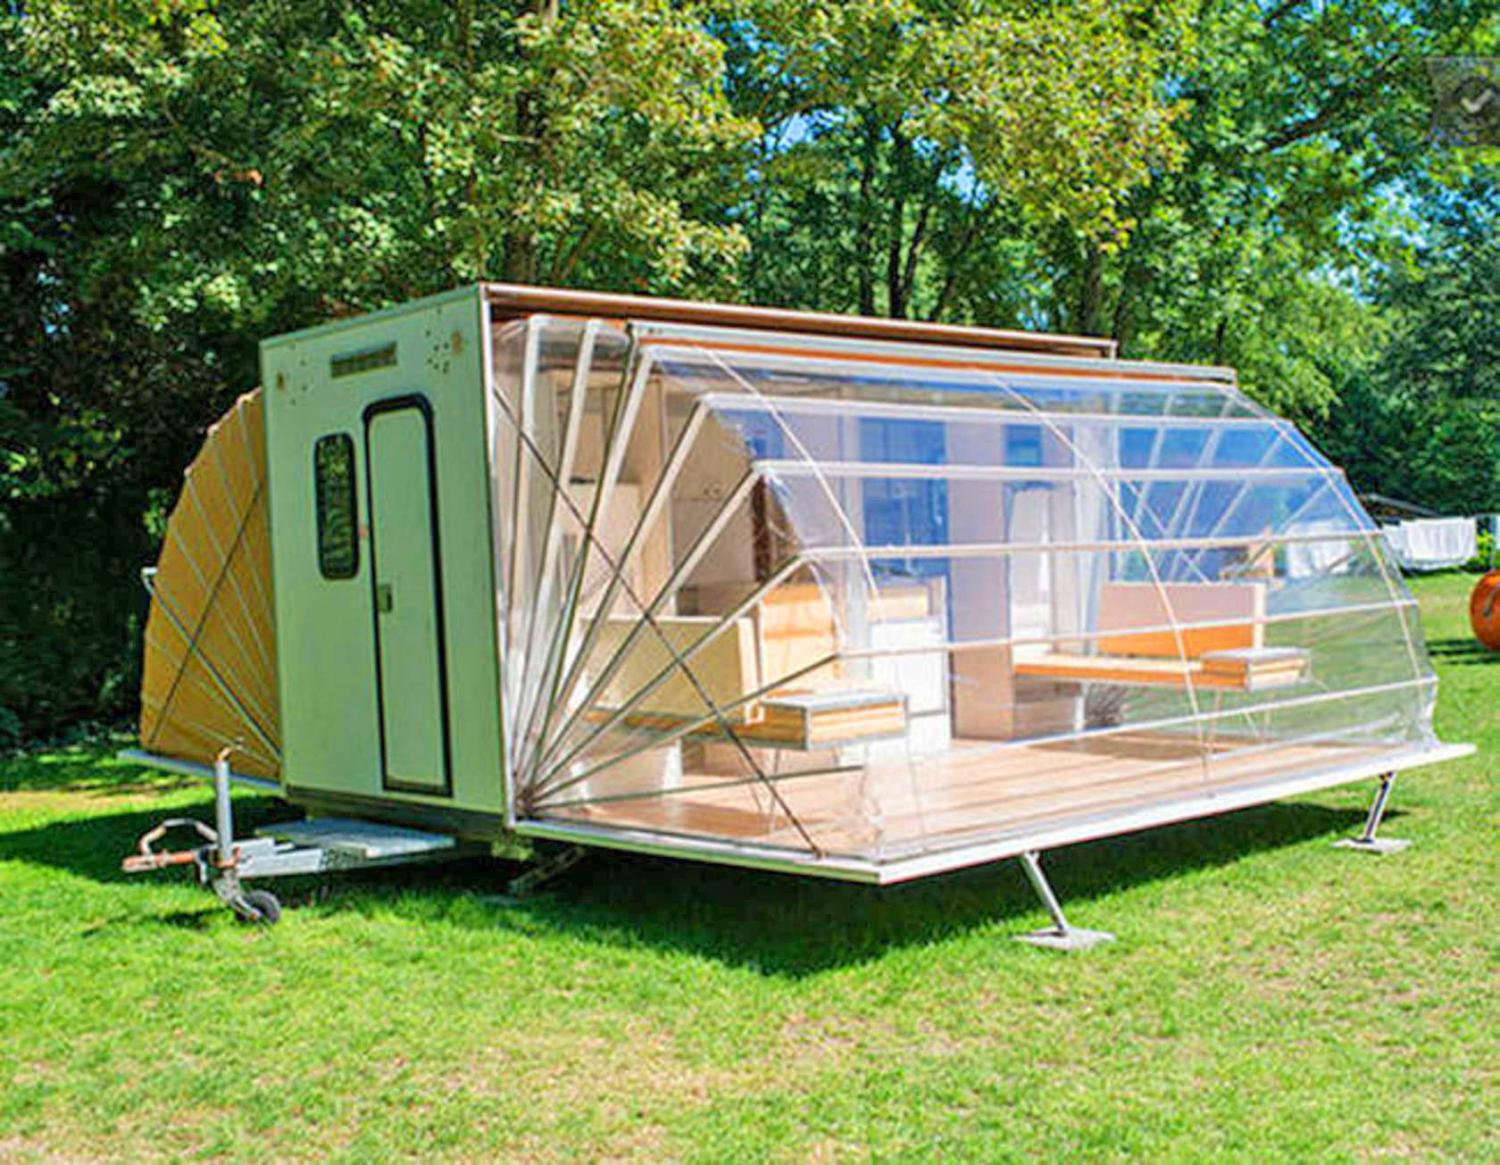 Folding Camping Trailer Expands To Triple Its Size With Fold-Out Awnings - De Markies Expanding Retro Trailer